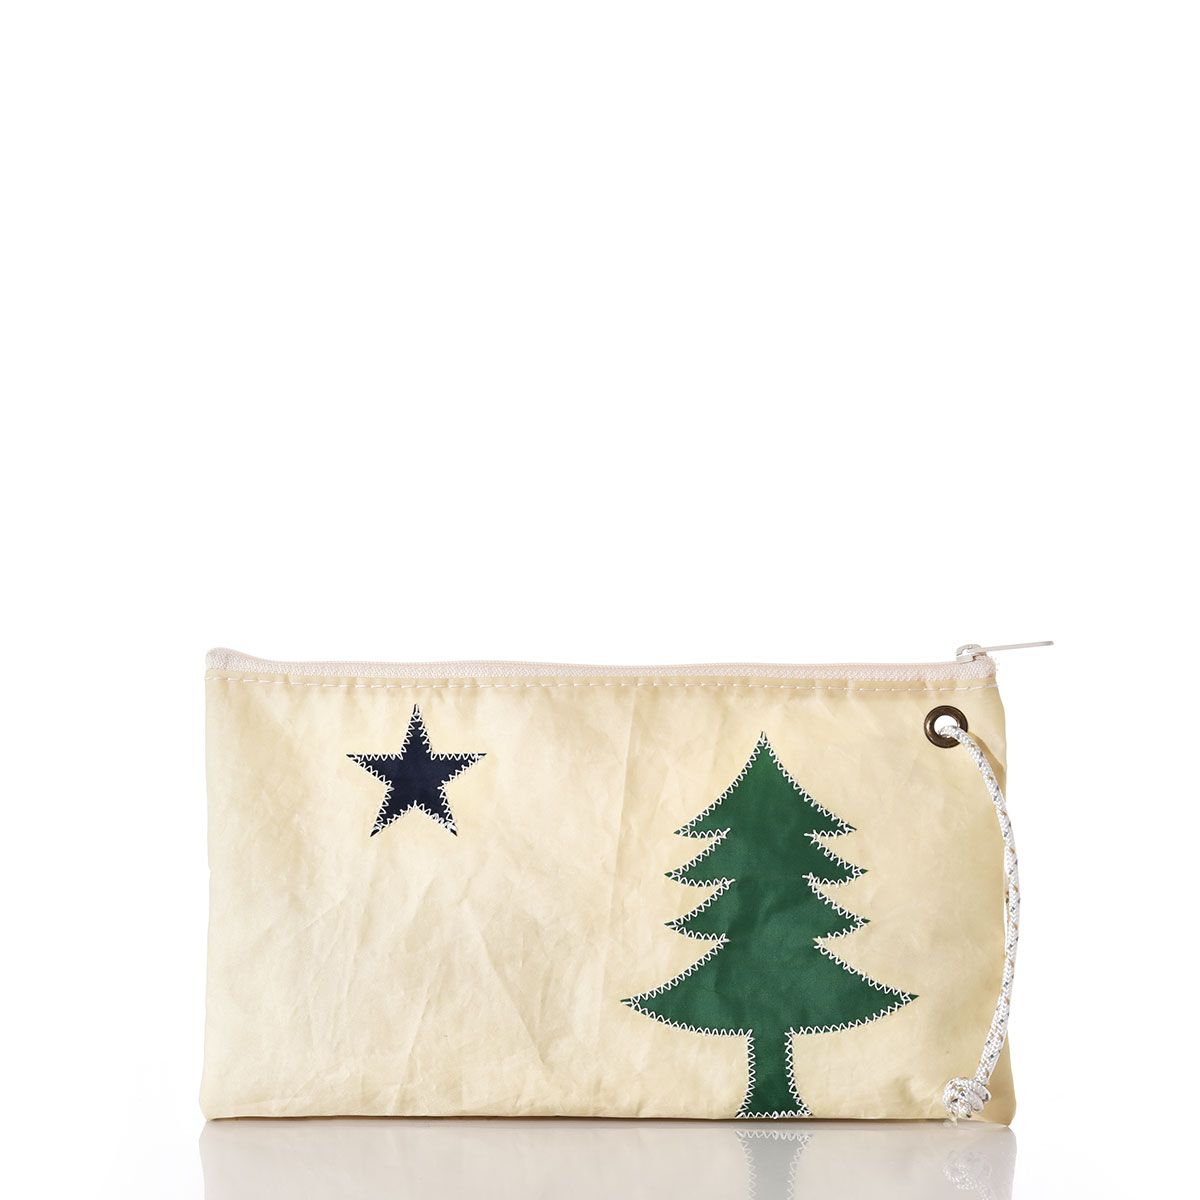 recycled sail cloth large wristlet featuring a navy star and green pine tree from Maine's original state flag, with hemp rope handles